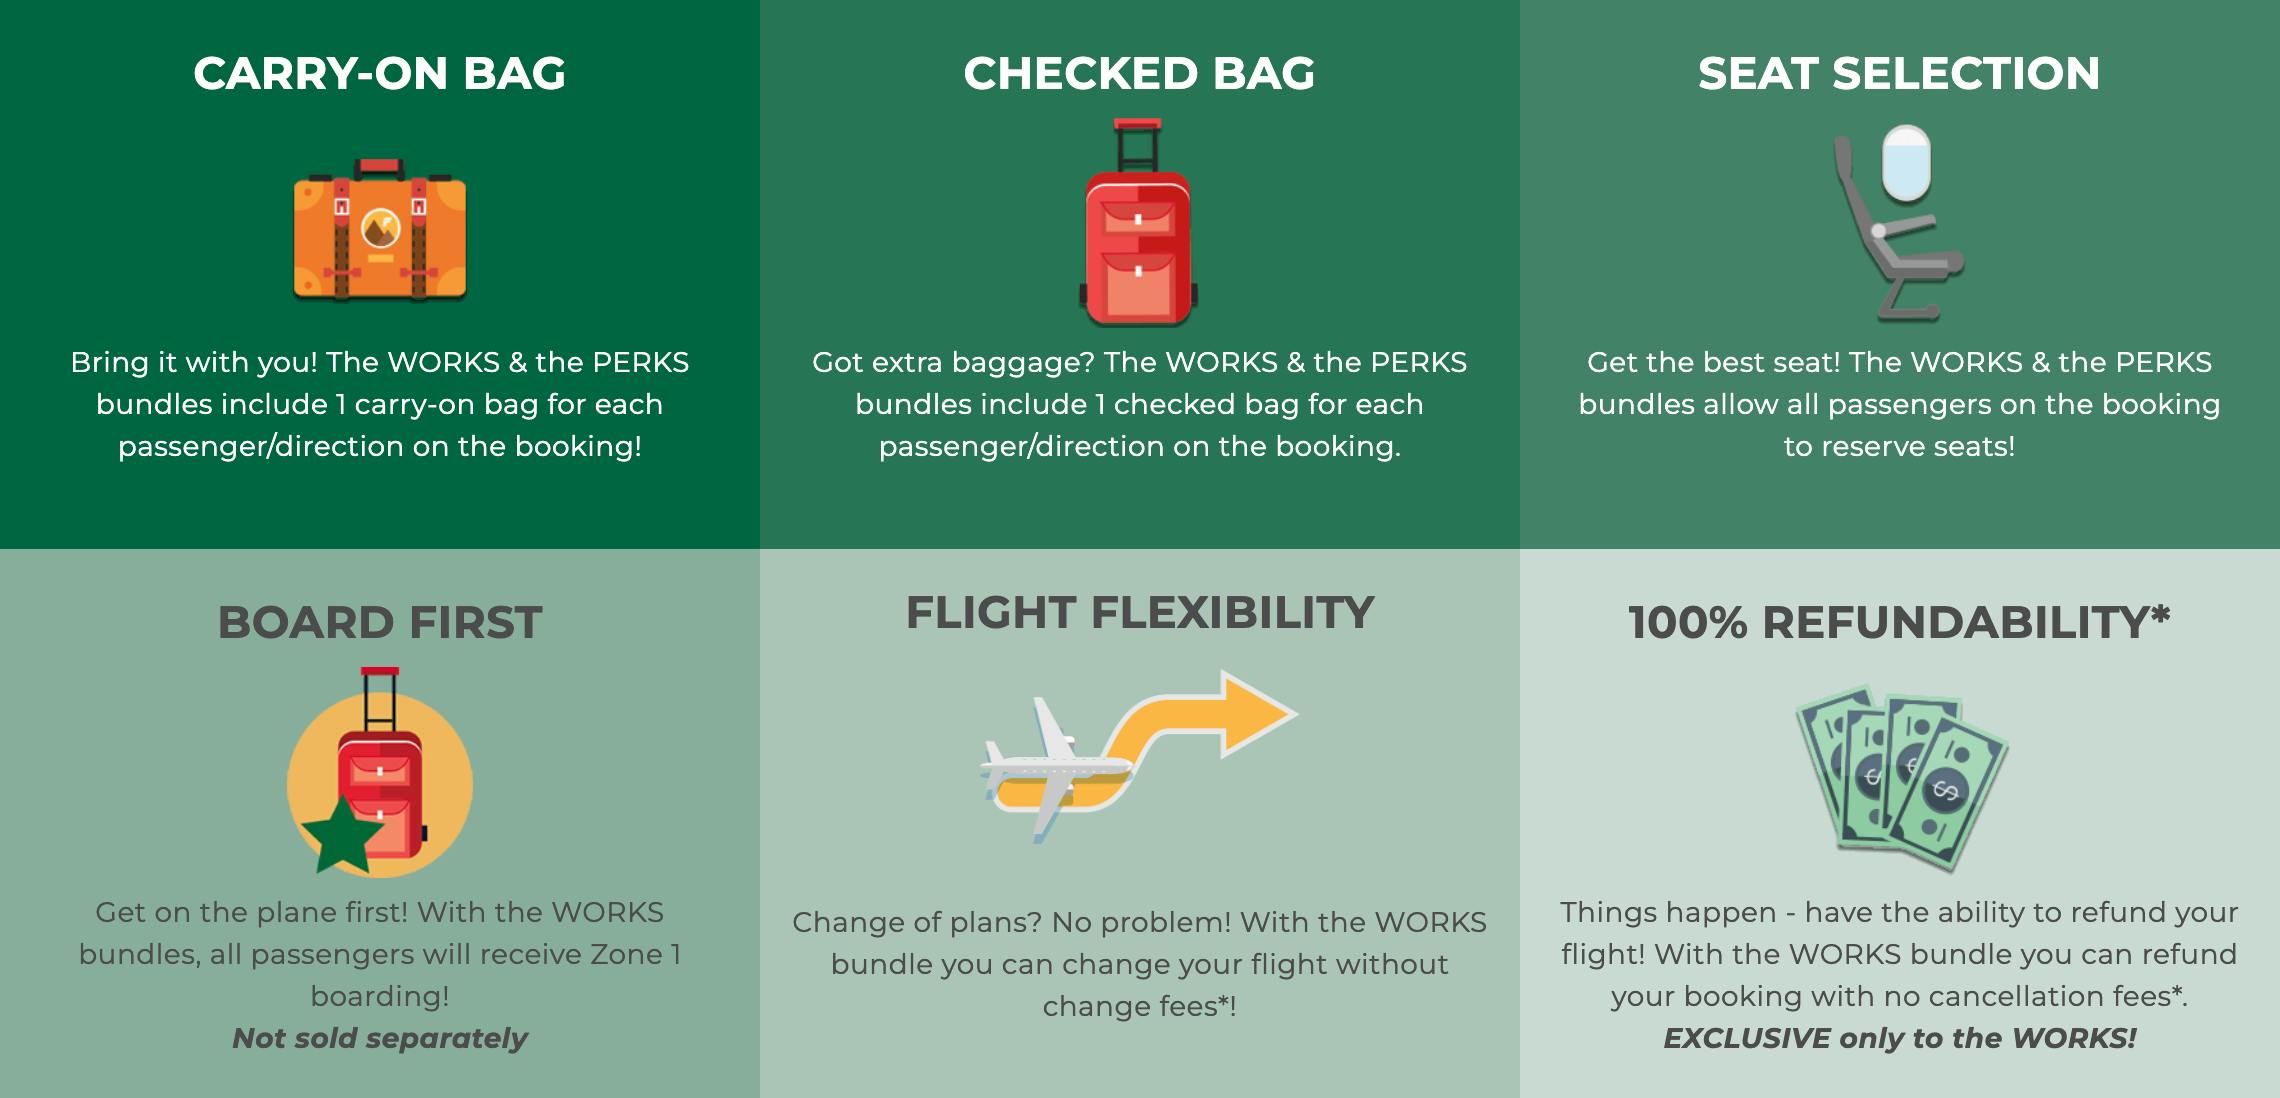 Frontier Airlines CarryOn Policy Everything You Need to Know